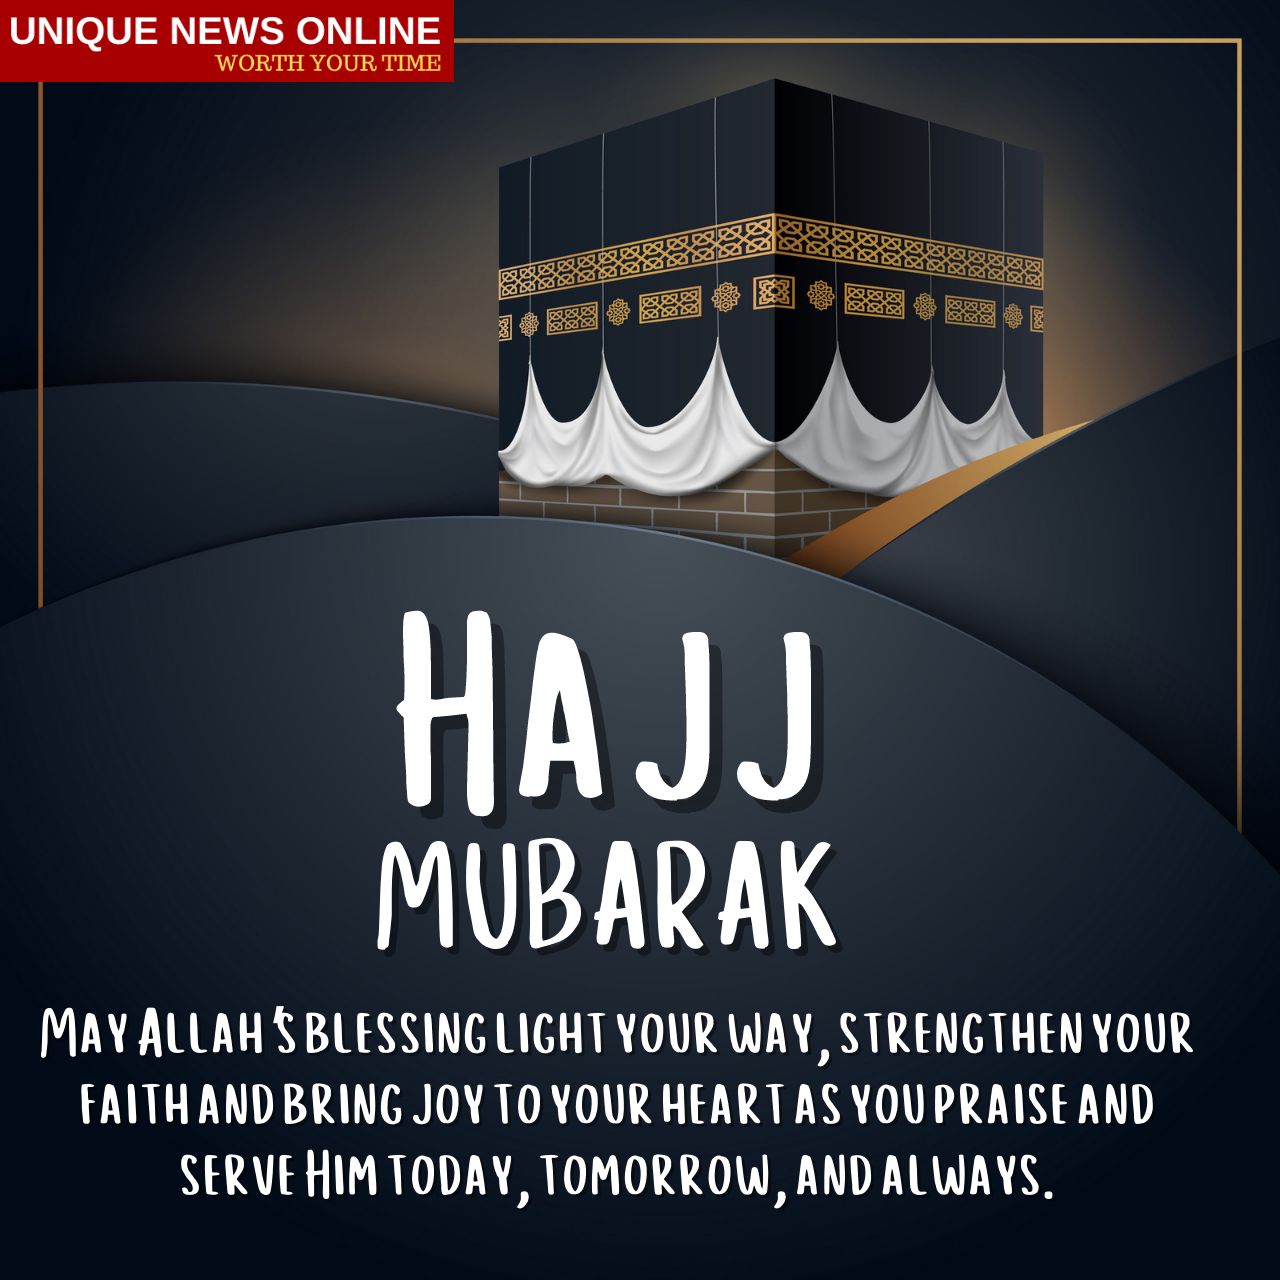 Hajj Mubarak 2021 Quotes, Wishes, Images, Dua, PNG, Greetings, Messages, Sh...